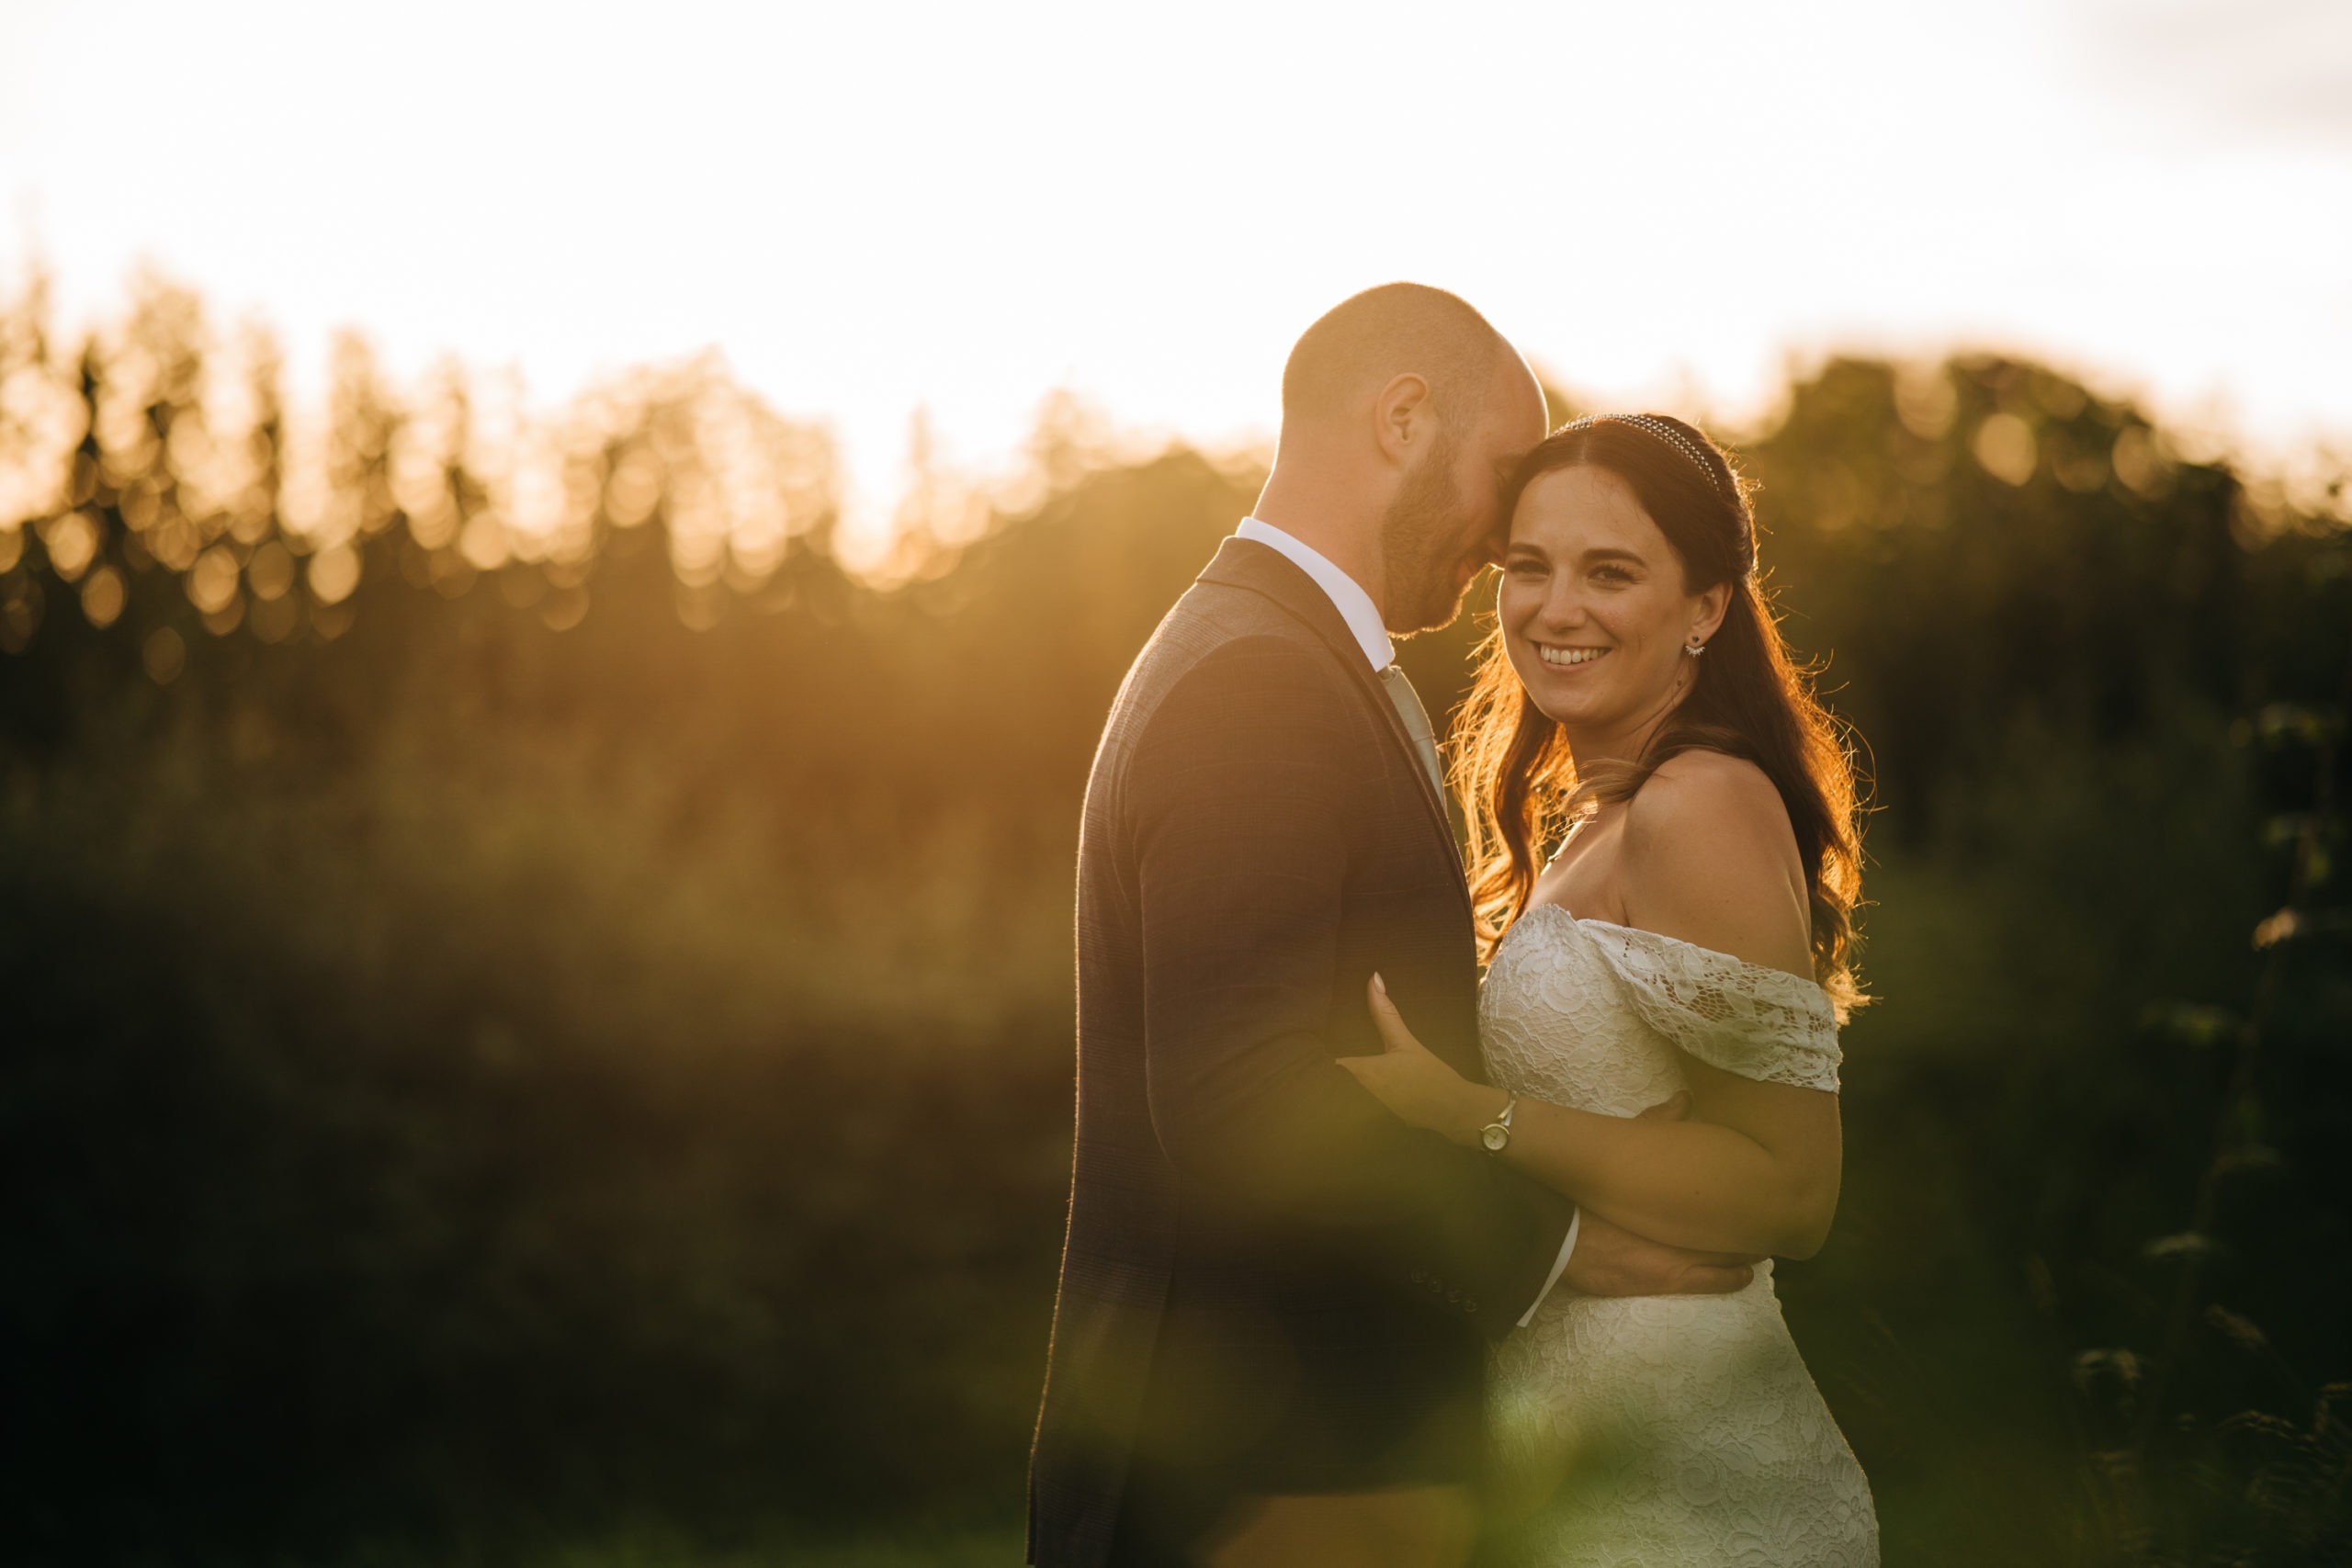 sunset portraits of the bride and groom kent wedding